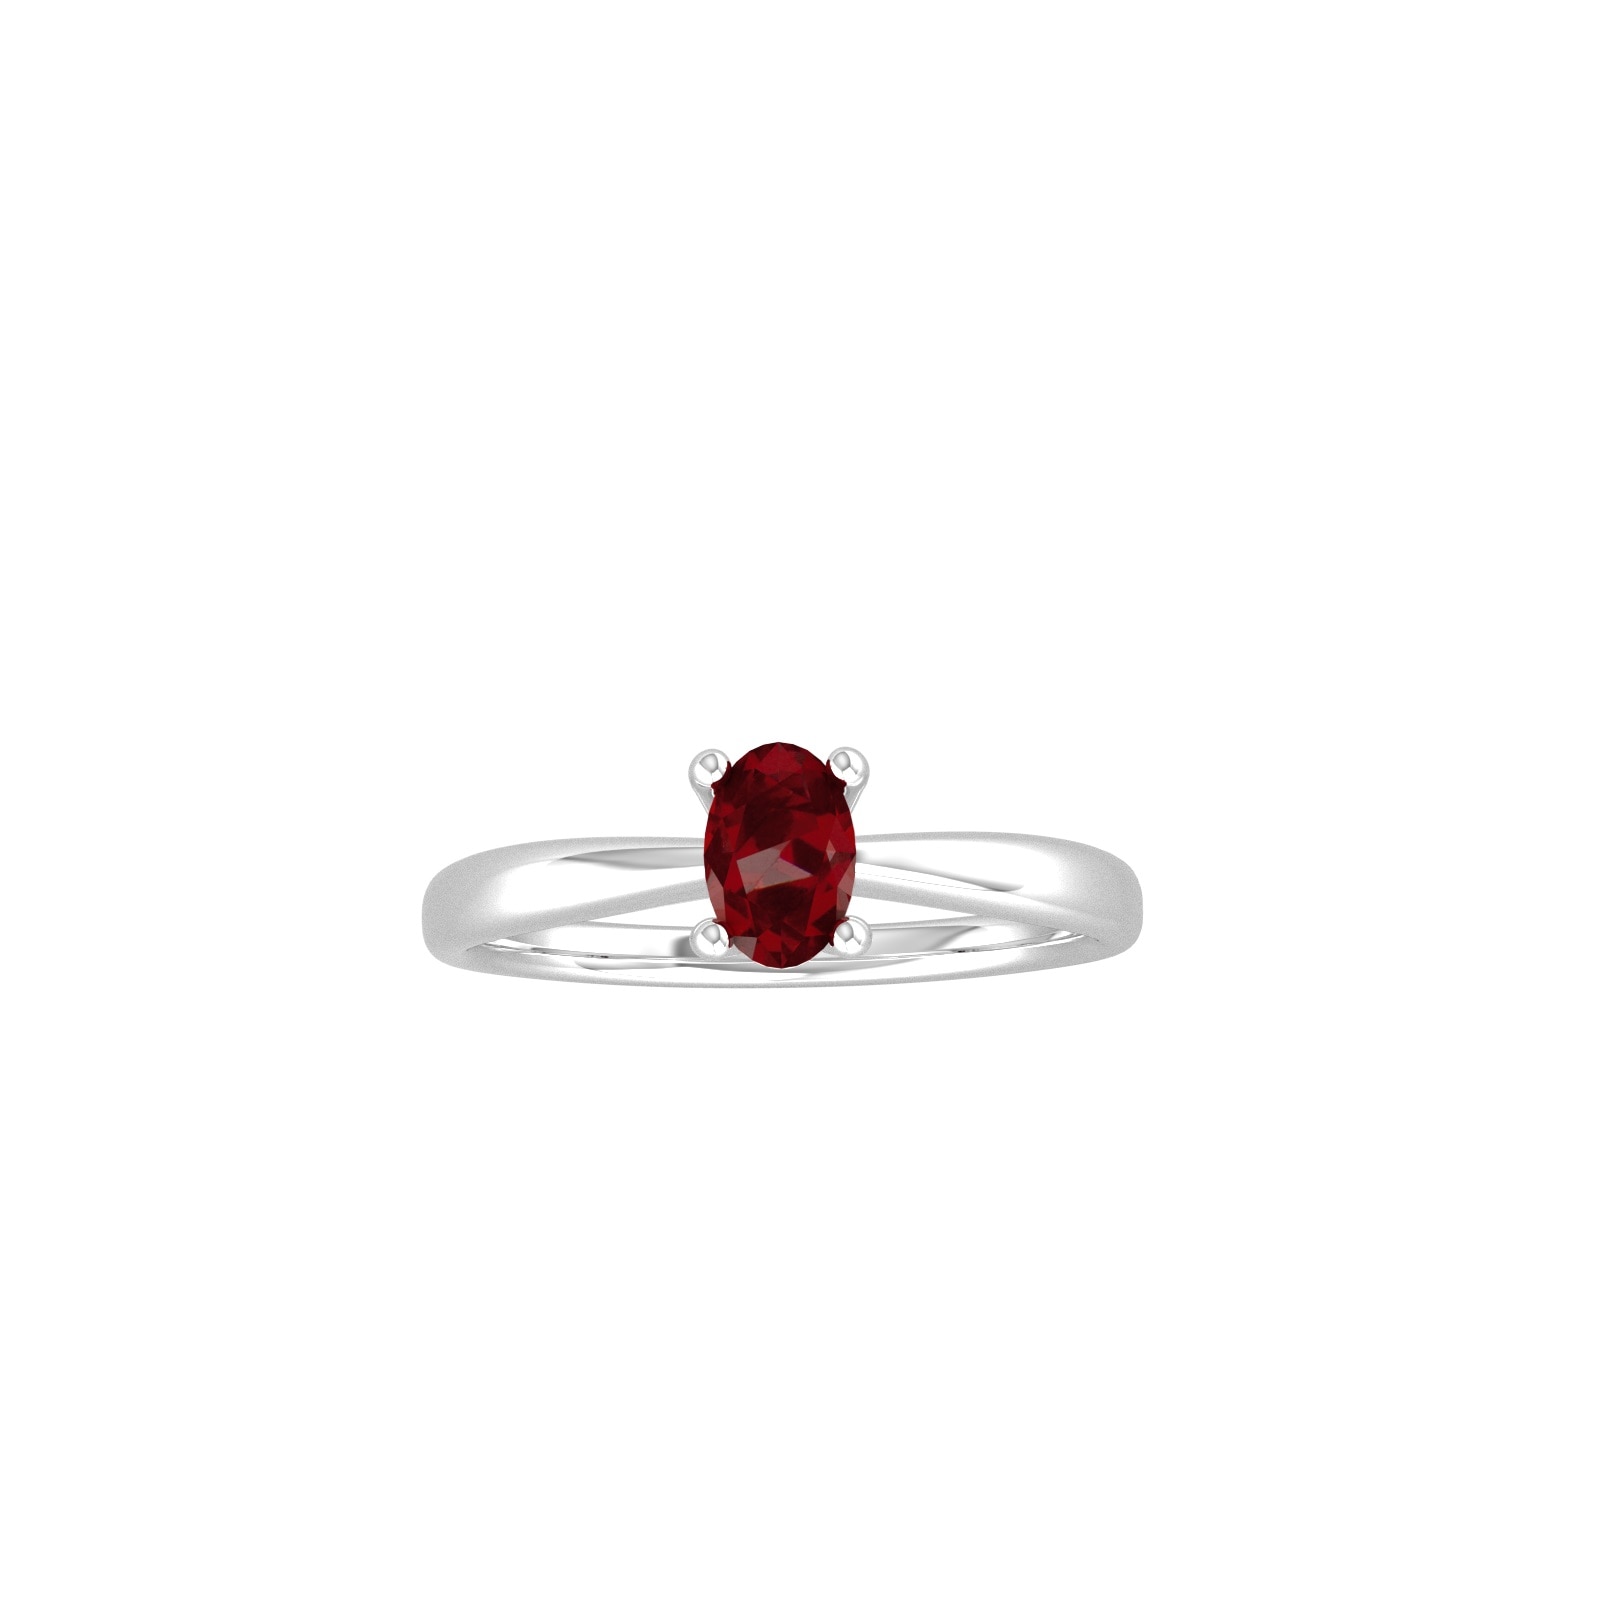 9ct White Gold 4 Claw Oval Garnet Ring